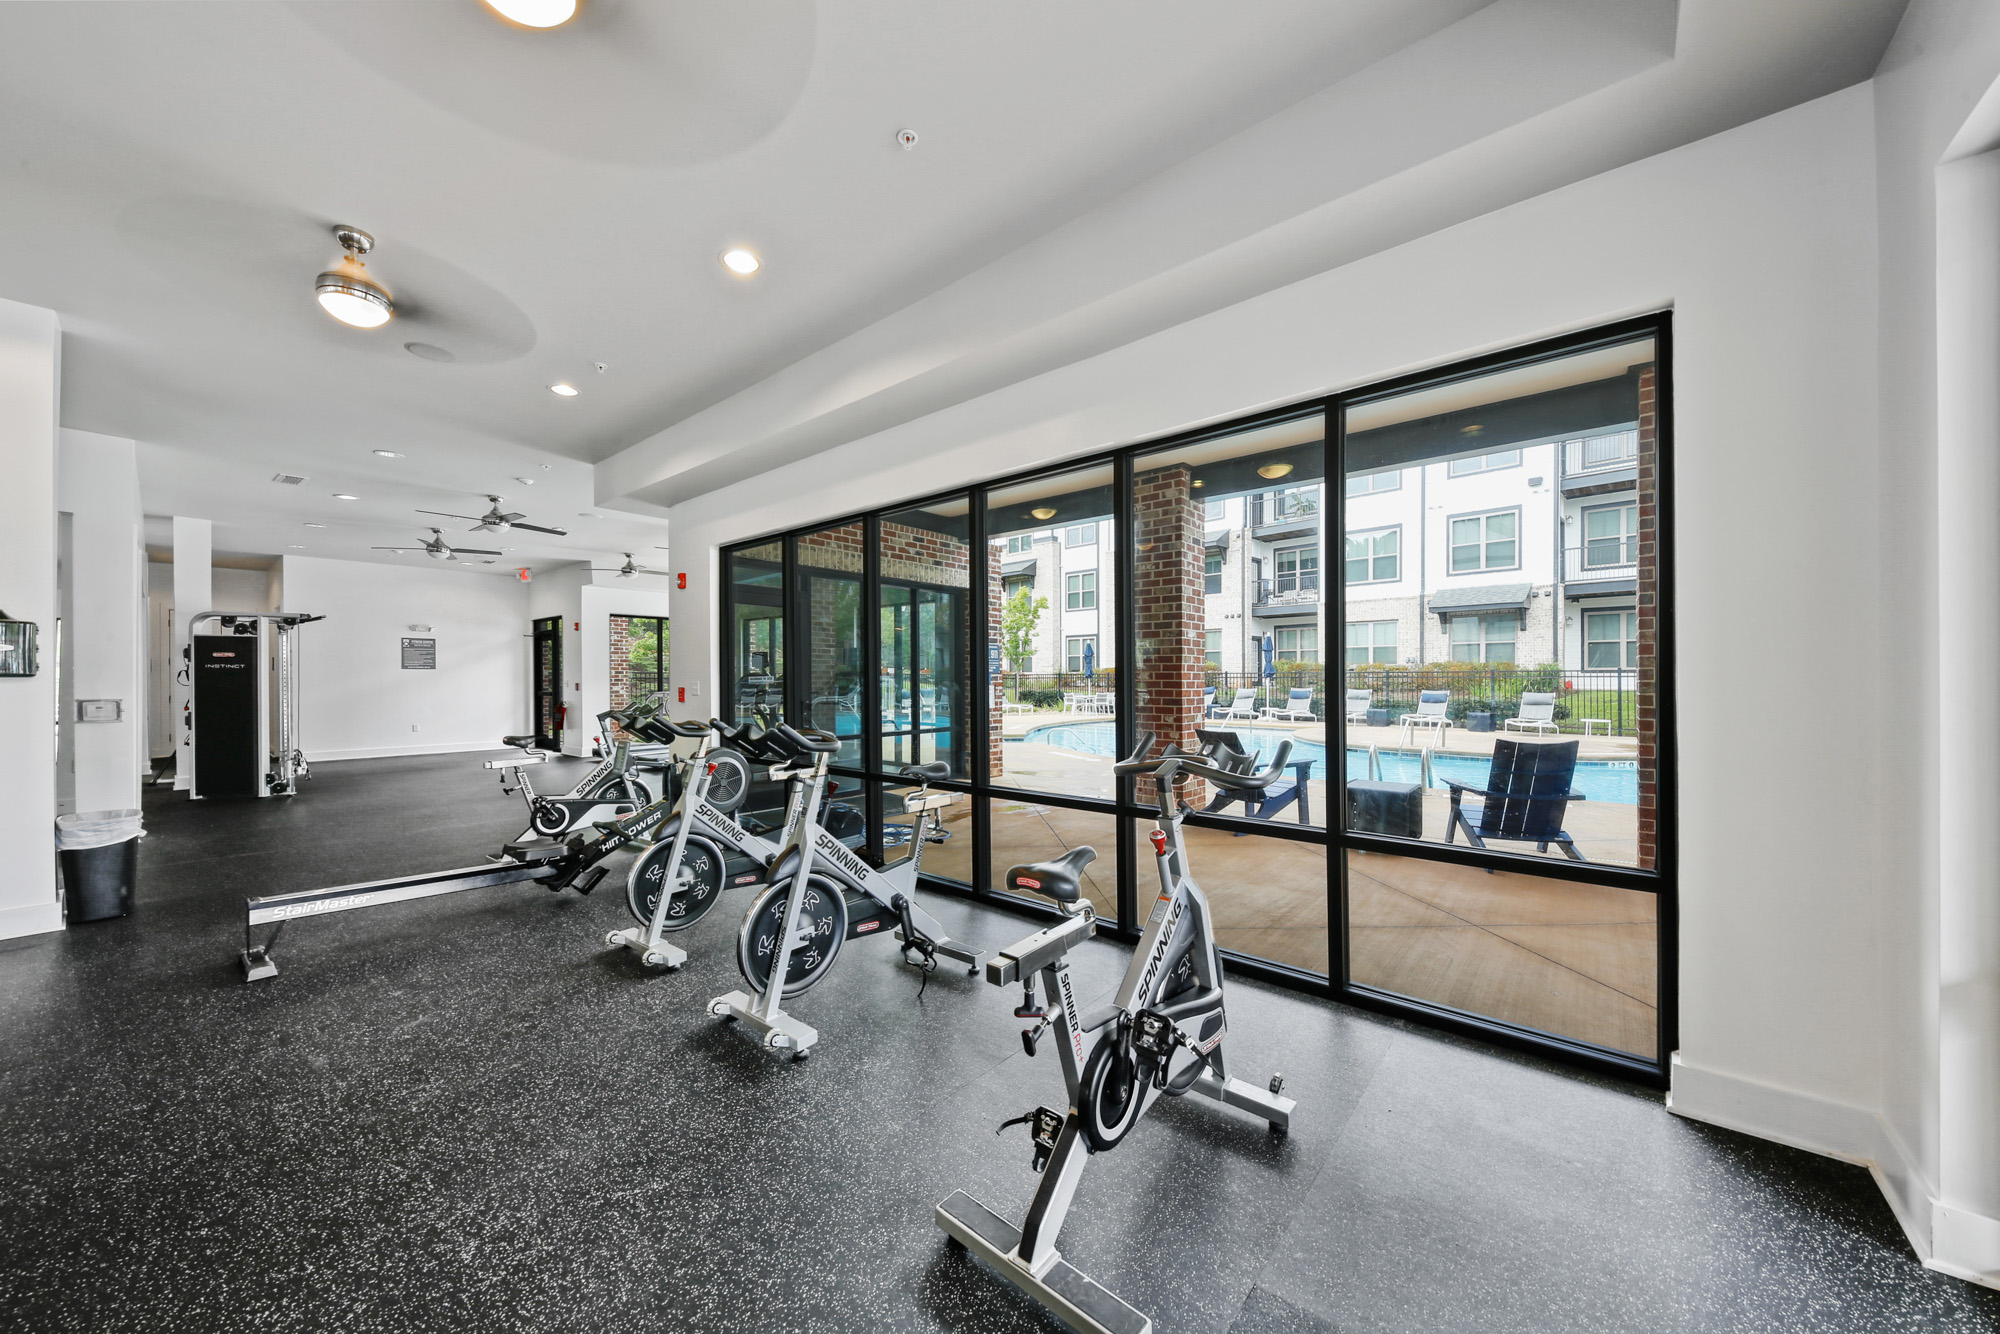 Cardio equipment at Park 9 apartments near Atlanta looks out to the pool deck.